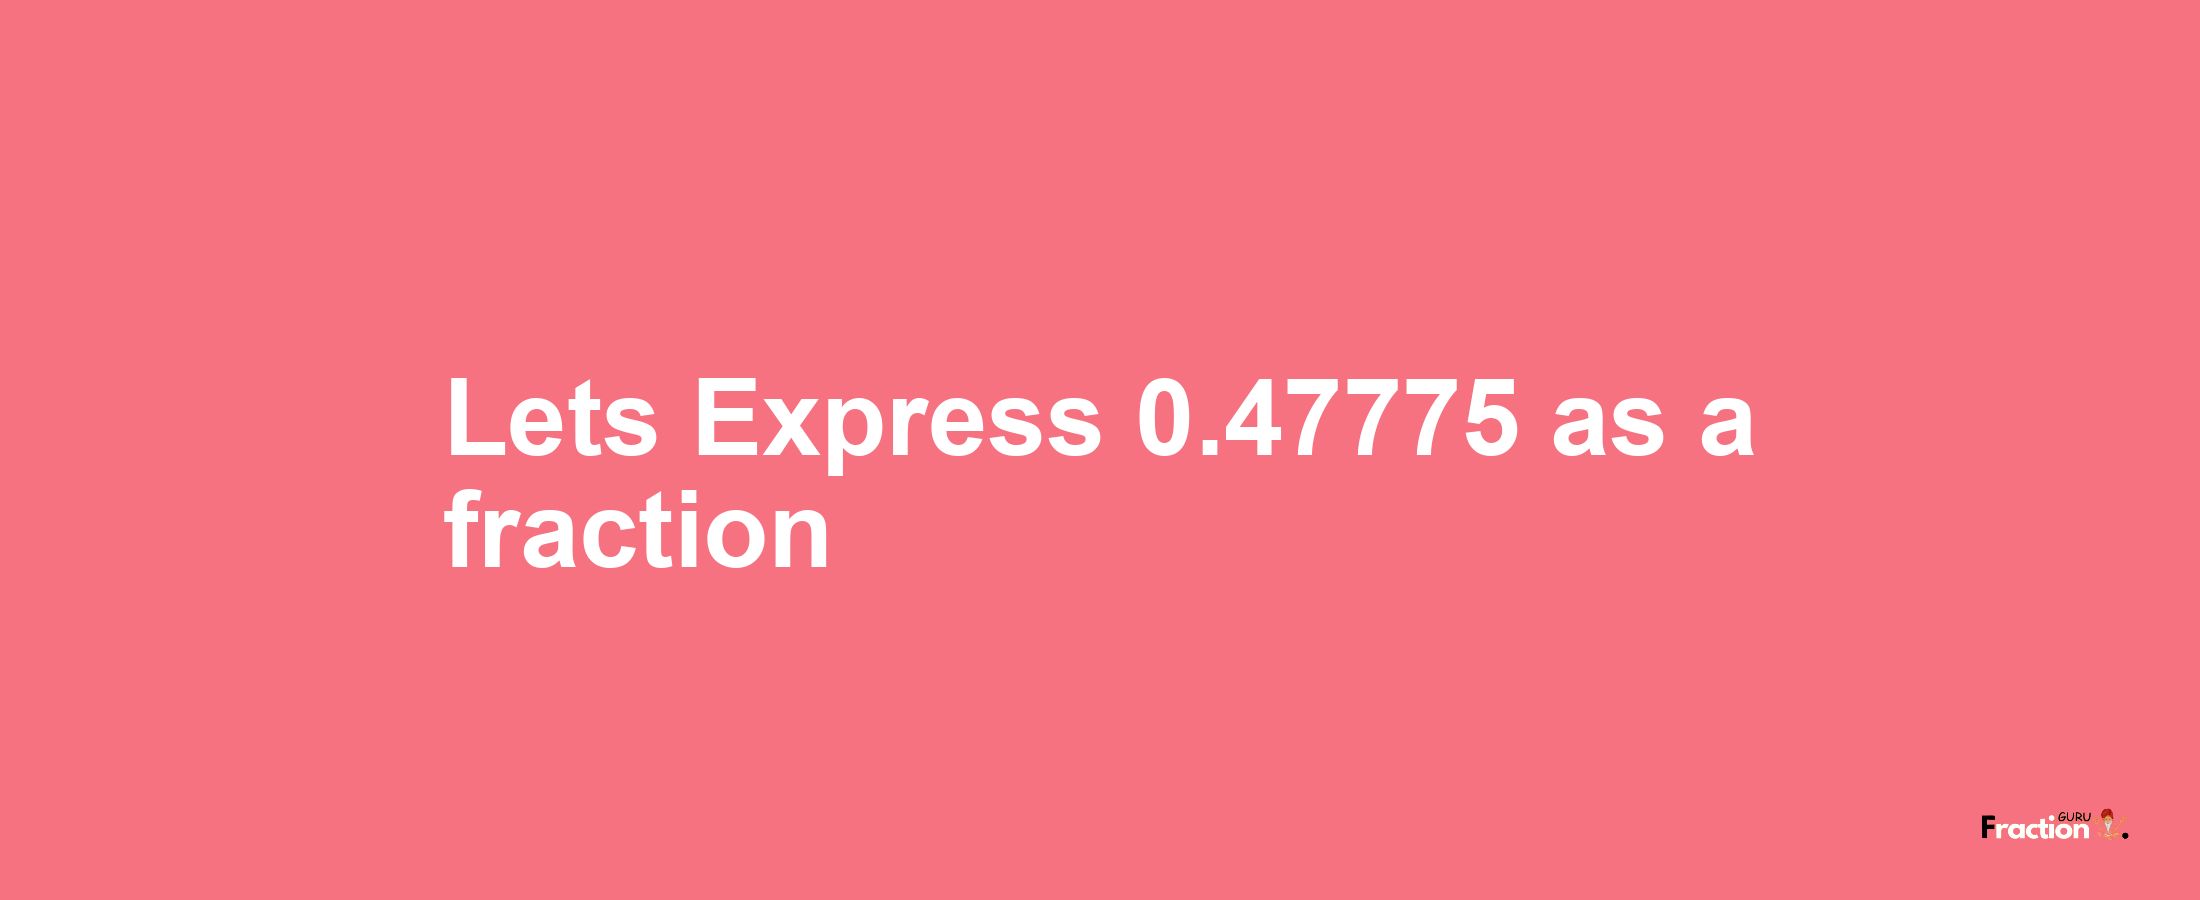 Lets Express 0.47775 as afraction